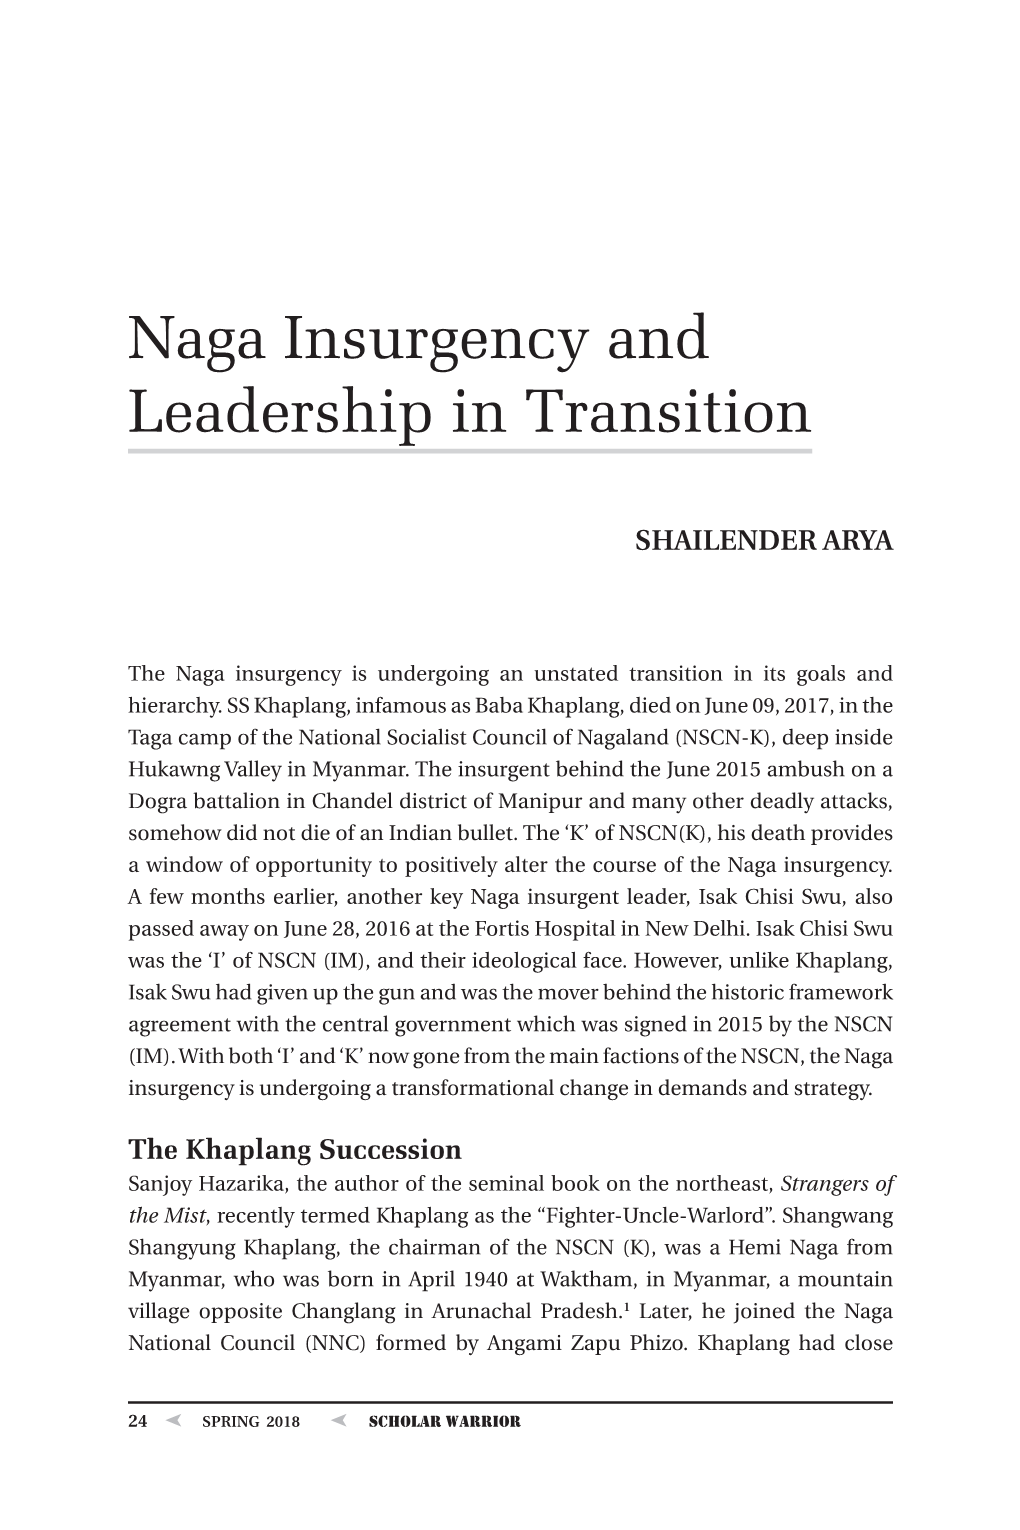 Naga Insurgency and Leadership in Transition, by Col